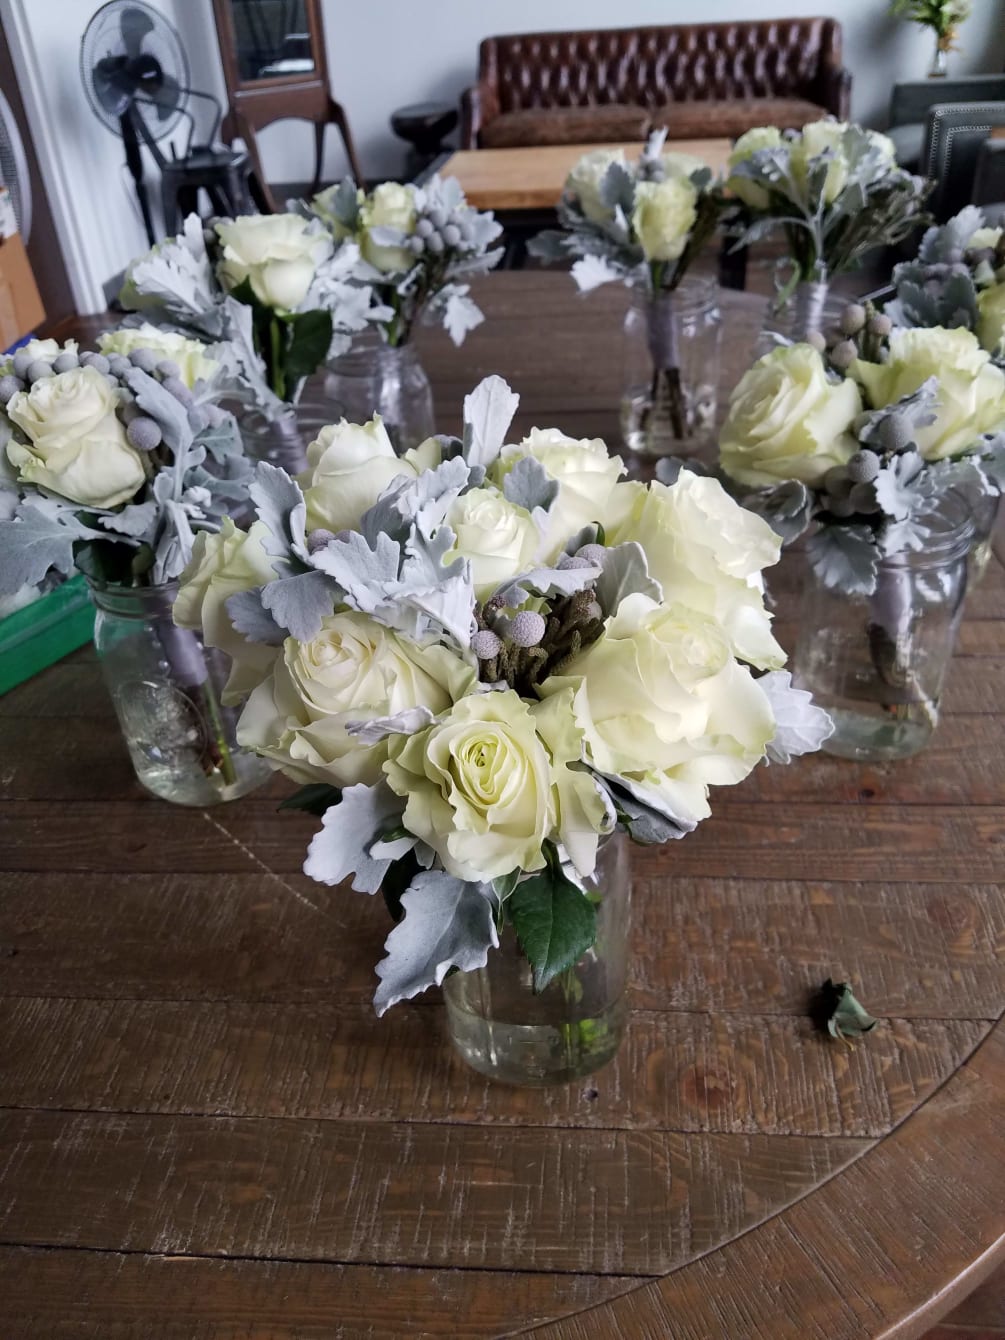 Includes White Flowers, Dusty Miller and Brunia